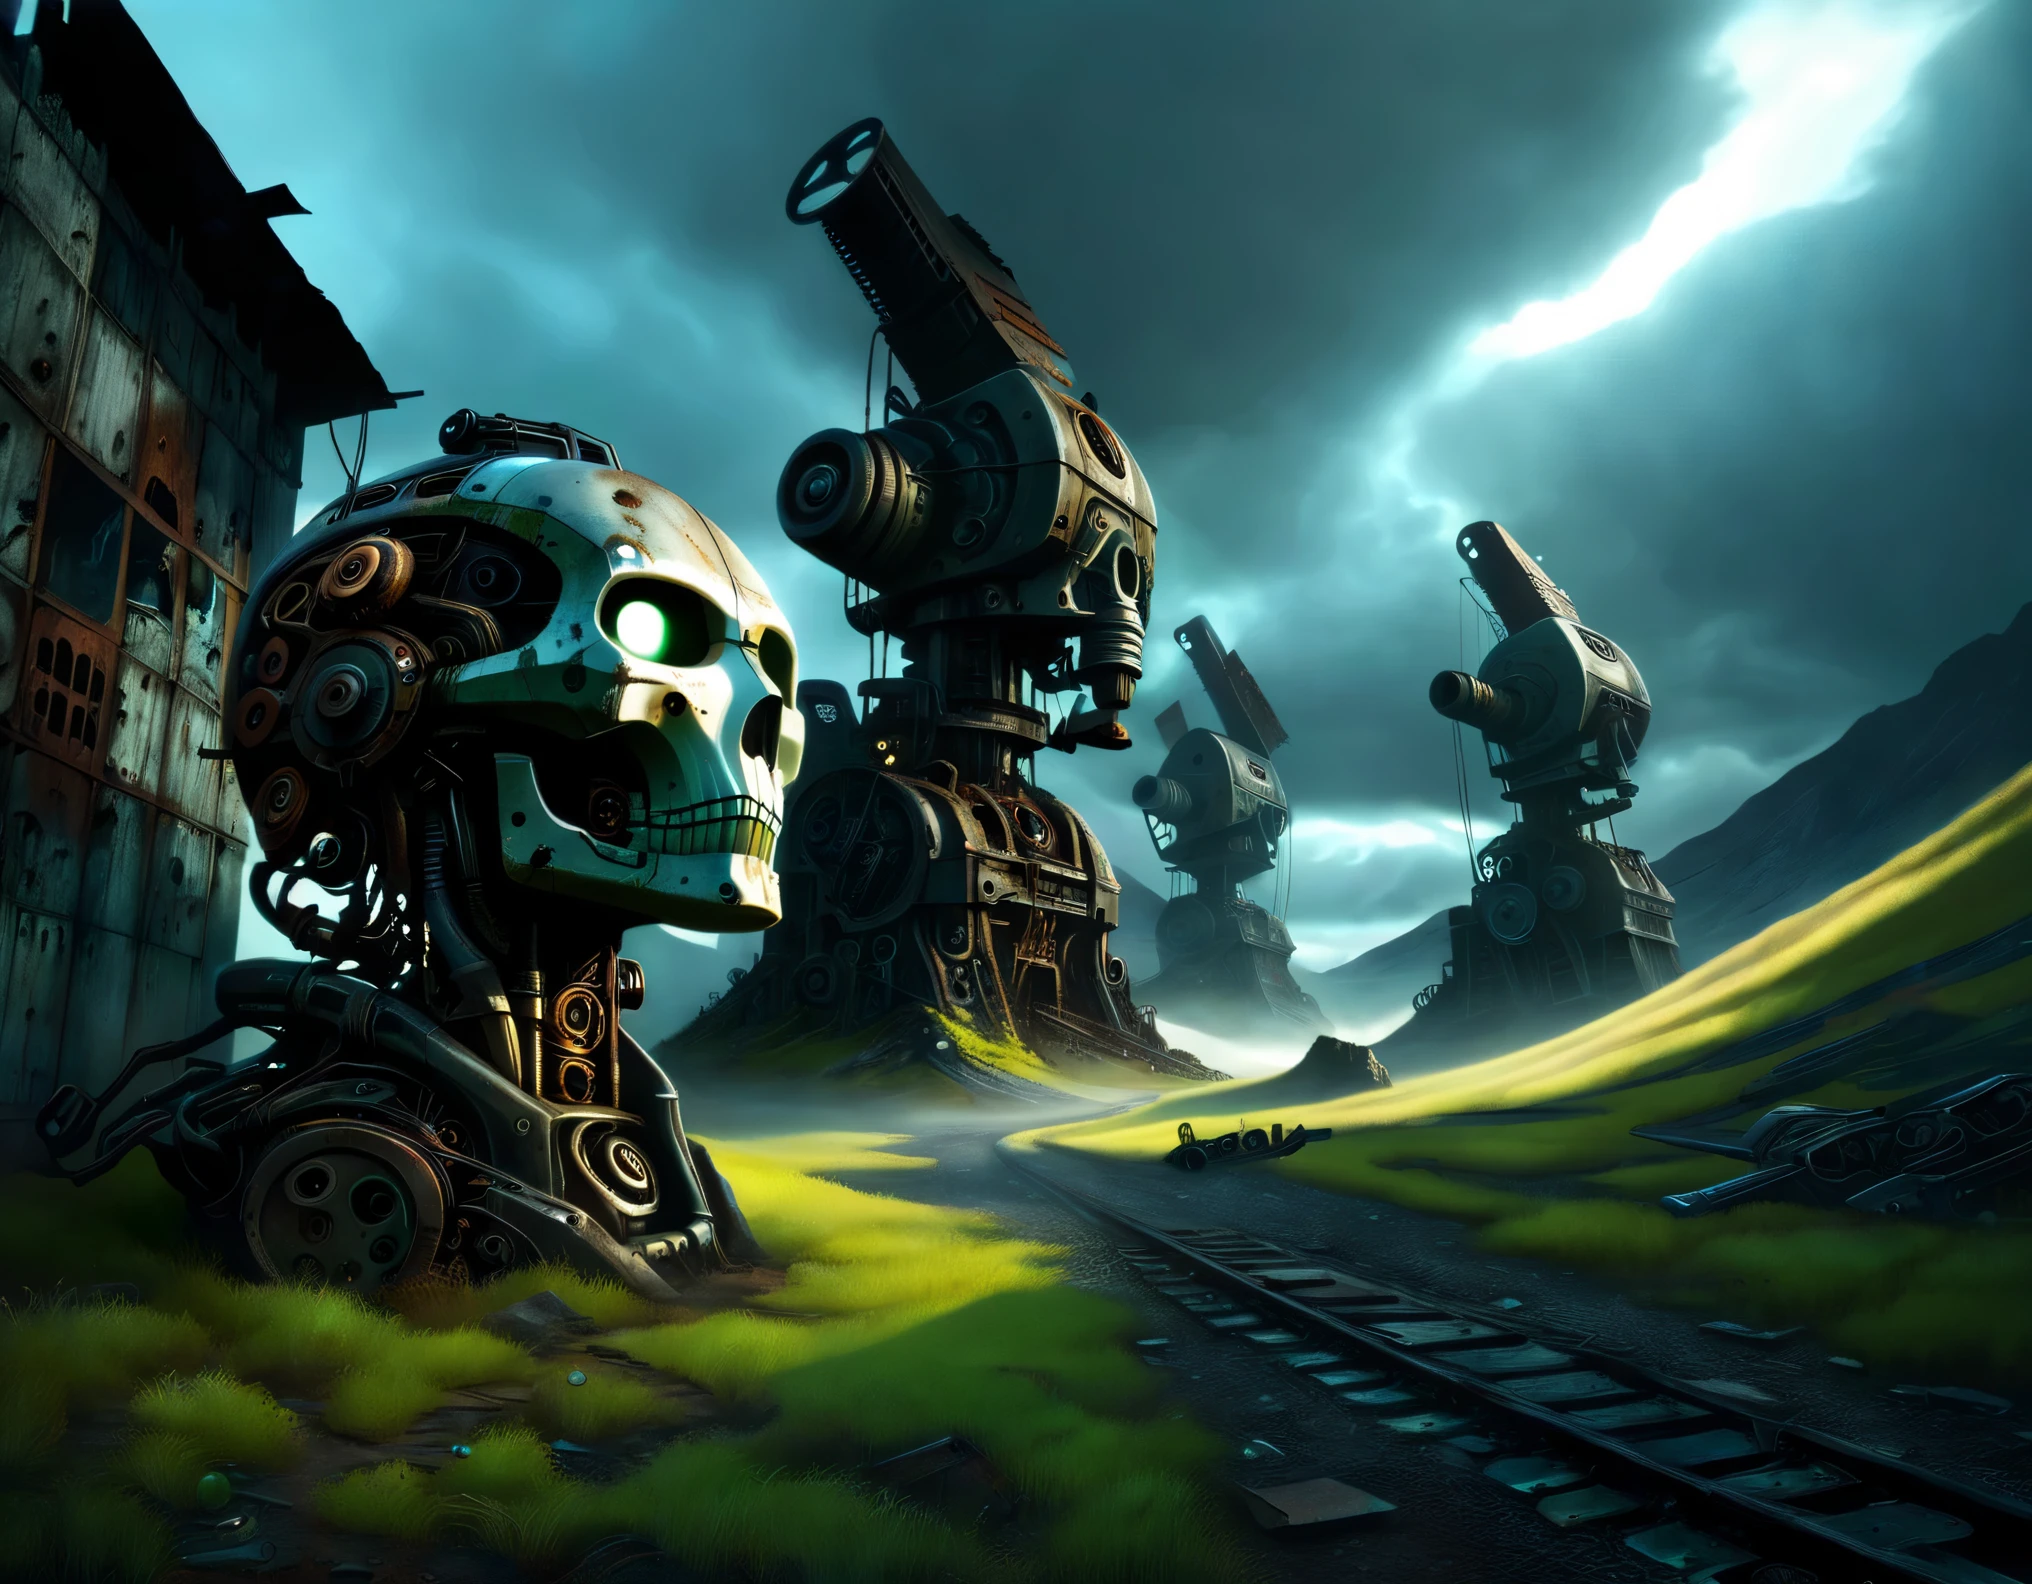 (Best Quality, High Definition), (Mountains of Abandoned Mechanicals), Super duper mechanical heads with severed limbs, Super duper mechanical heads with mutilated bodies, Super duper scrapped mechanical heads, Super duper broken mech junk mountains, mechanical junk mountains, Post-apocalyptic, anti-utopia, rusted metal, broken parts, moss, ghostly atmosphere, destroyed cities, mechanical wrecks, lifelessness, desolation, somber lighting, dramatic perspective, decay, futuristic, cyberpunk aesthetics, darkness, contrasts, shadows, mystery, abandoned buildings, wreckage, discarded machinery, haunted, silence, solitude, desolation, fields